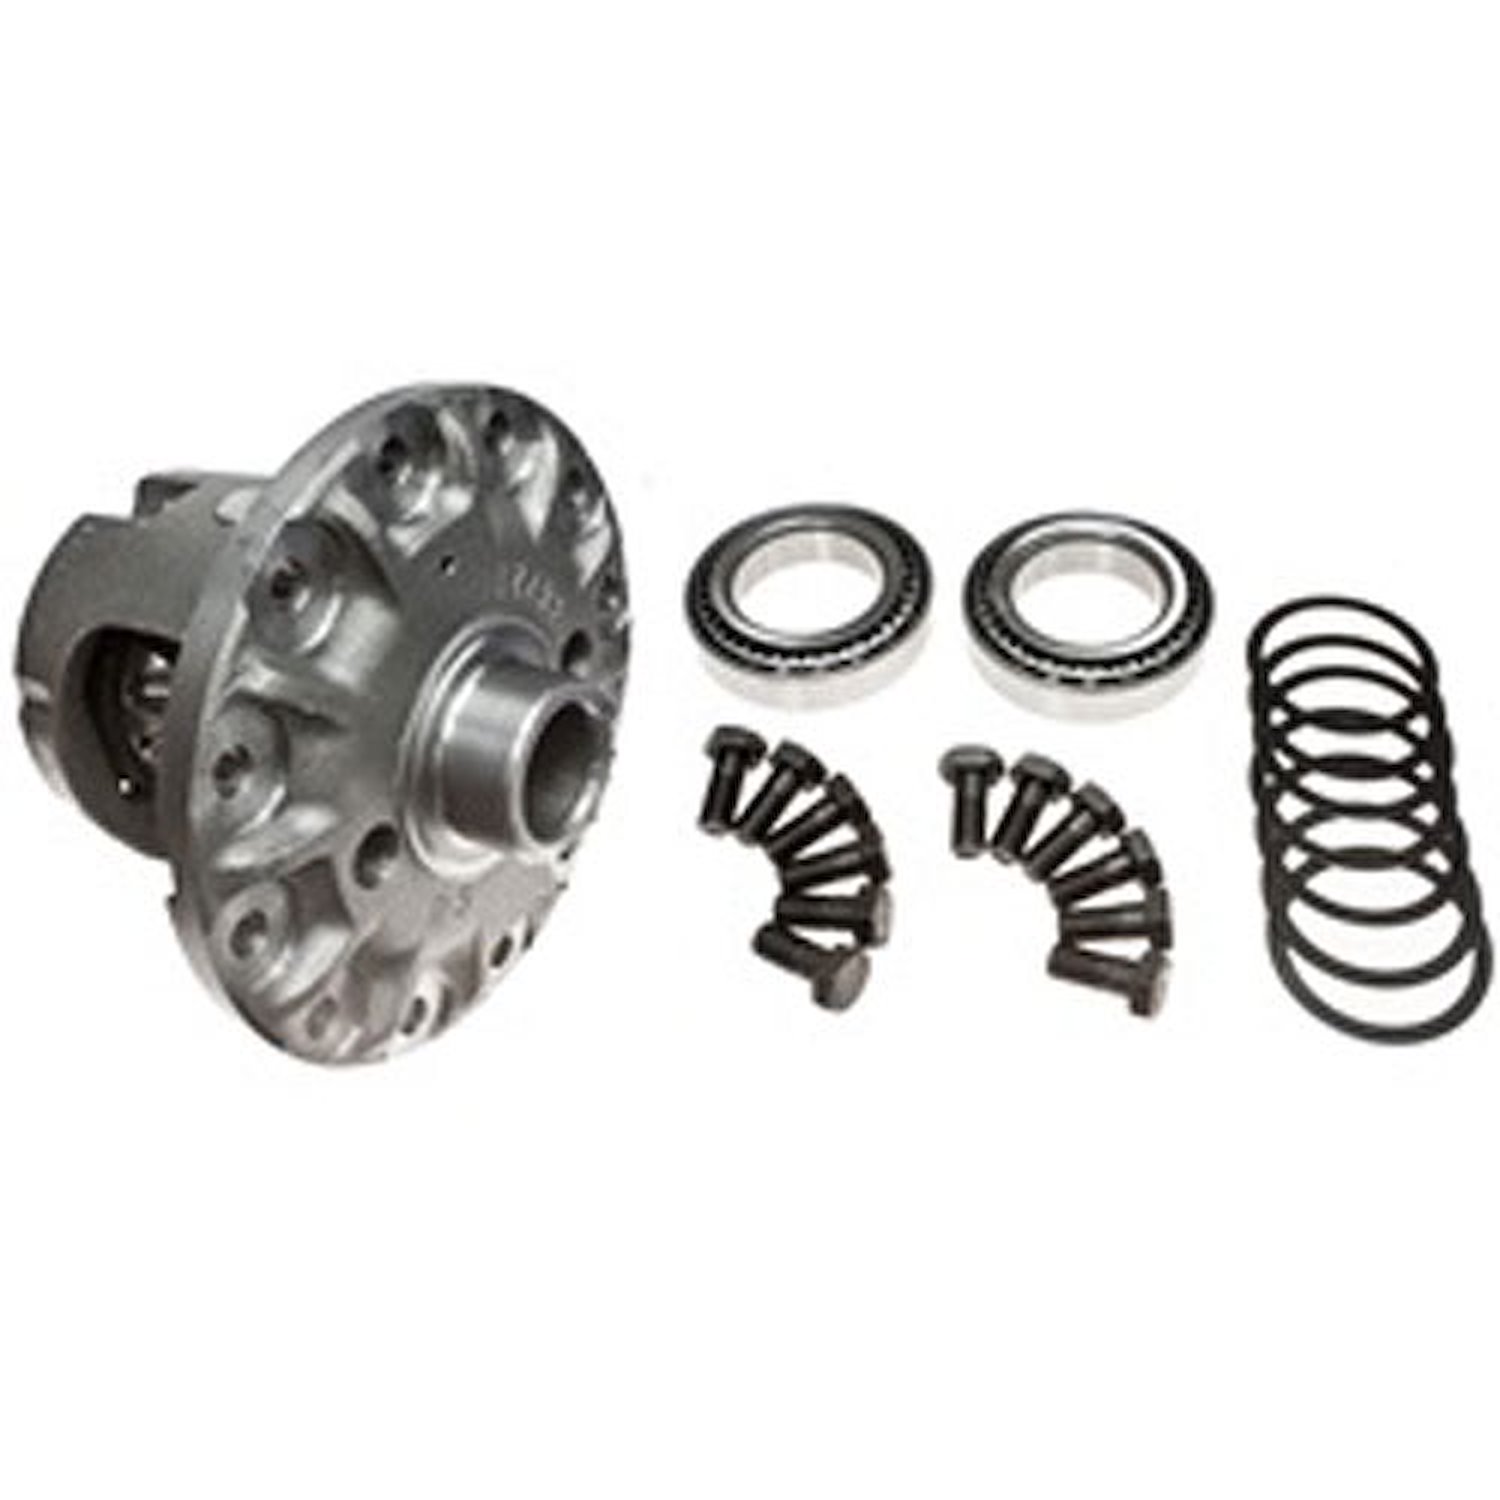 Differential Gear Case Kit 1.2 in. Dia. 28 Spline Incl. Internal Kit 2.73 Ratio And Up Open